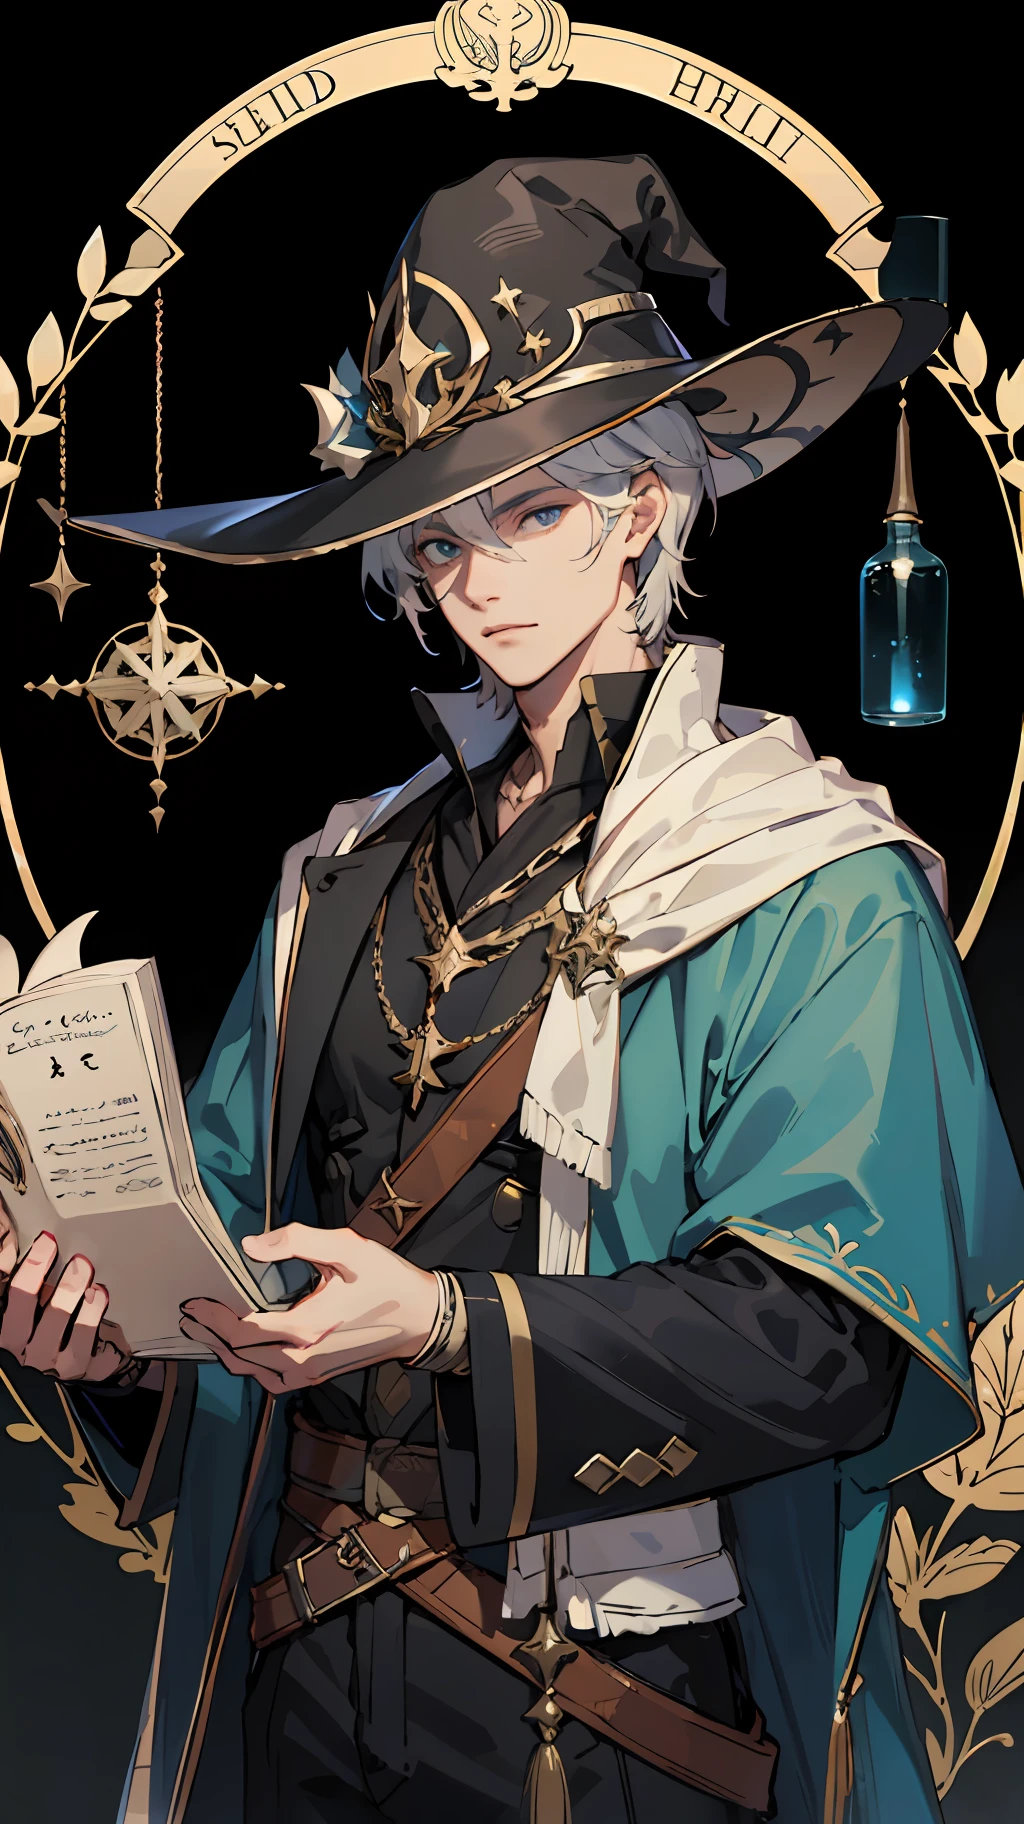 masterpiece, best quality, 1 male, adult, tall muscular, handsome, finely detailed eyes, intricate details, wizard, black hat with a pointed brim, broomstick with a carved handle, spellbook with a variety of spells, potion bottles with various ingredients, enchanted forest with a hidden wizard hut